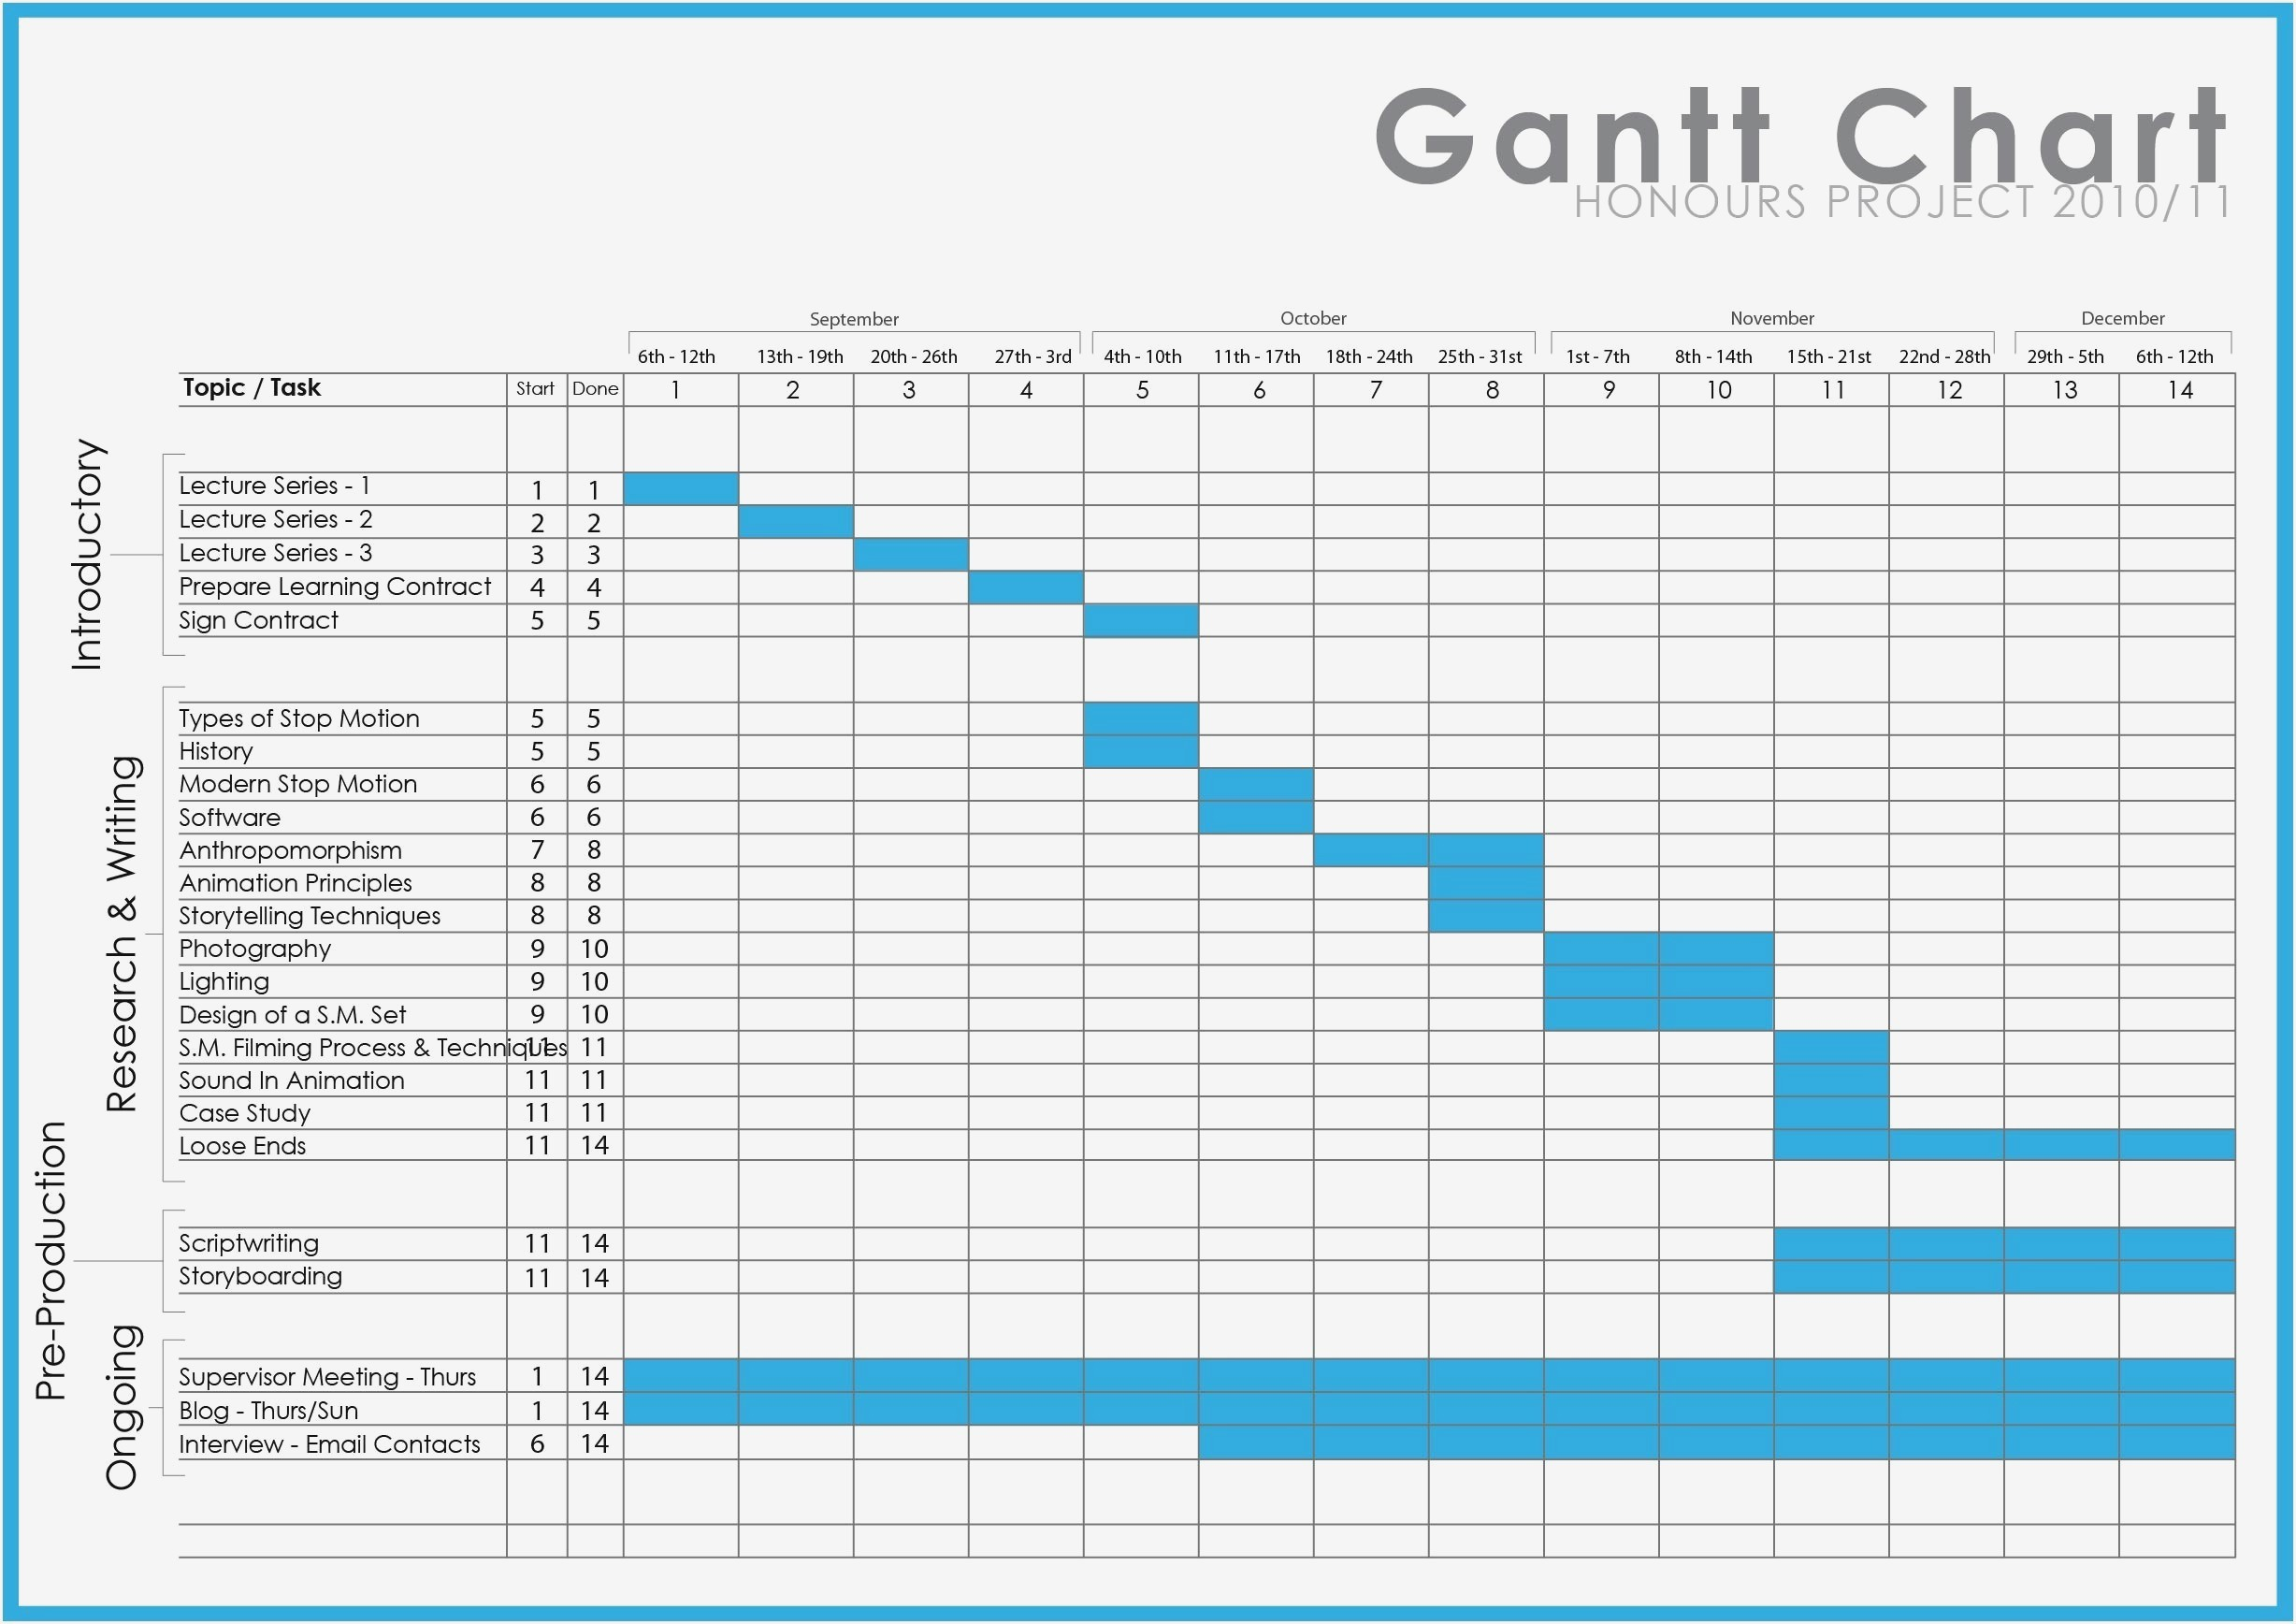 Gantt Chart Word Template Business Templates Microsoft Office For With Gantt Chart Template Free Microsoft Word